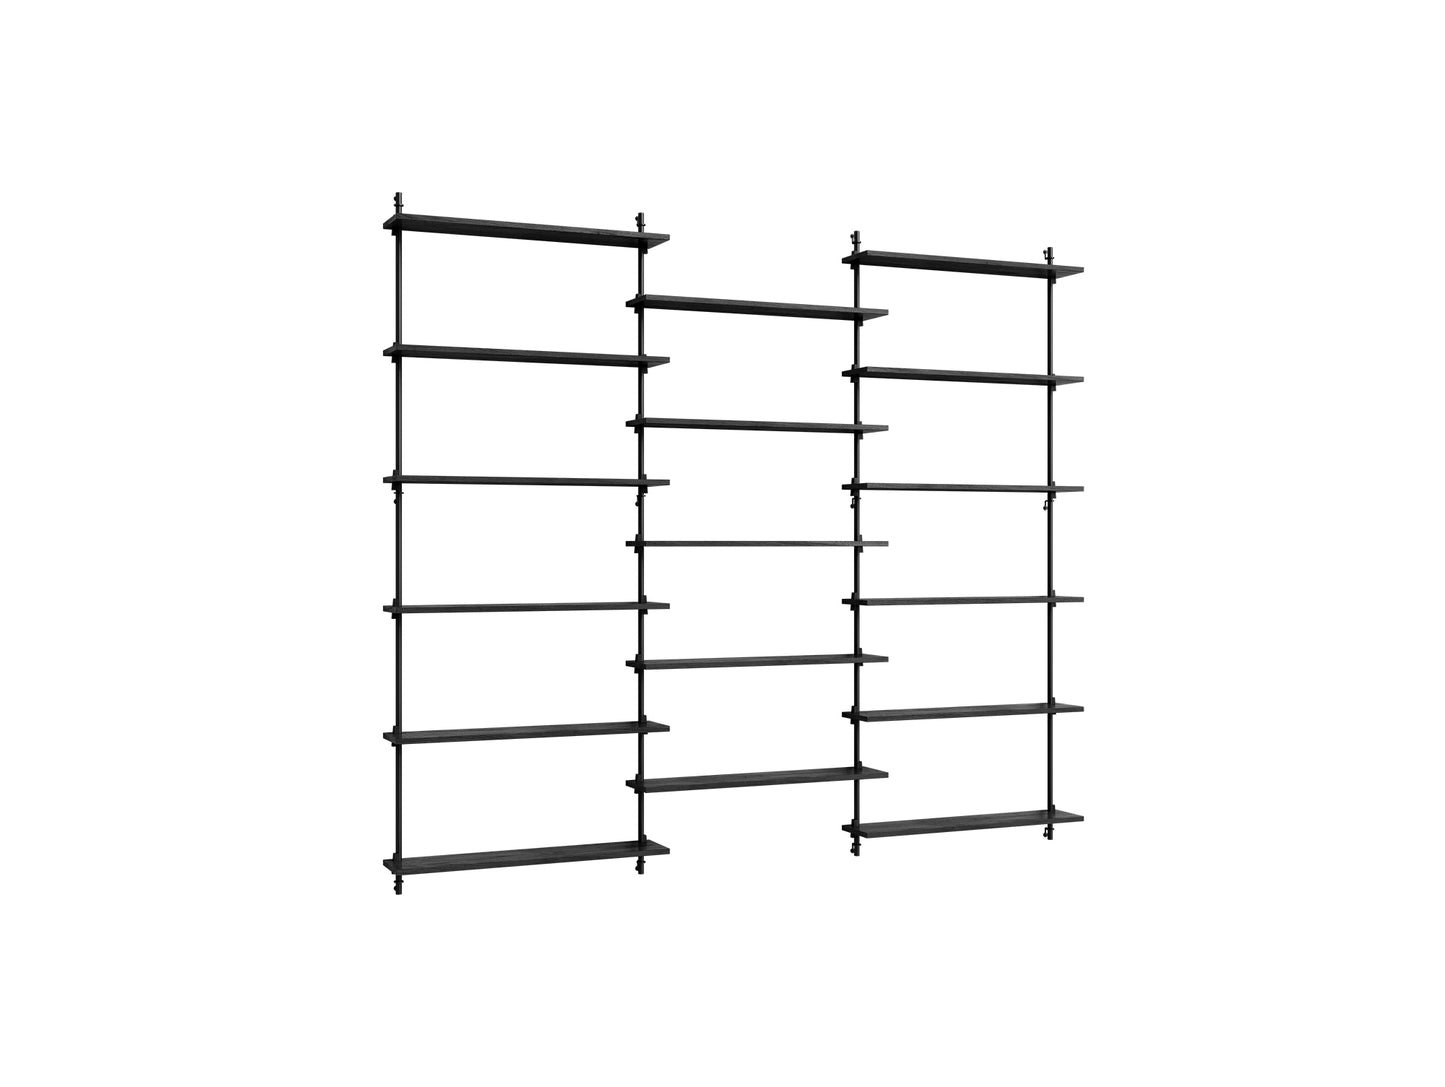 Wall Shelving System Sets (200 cm) by Moebe - WS.200.3 / Black Uprights / Black Painted Oak